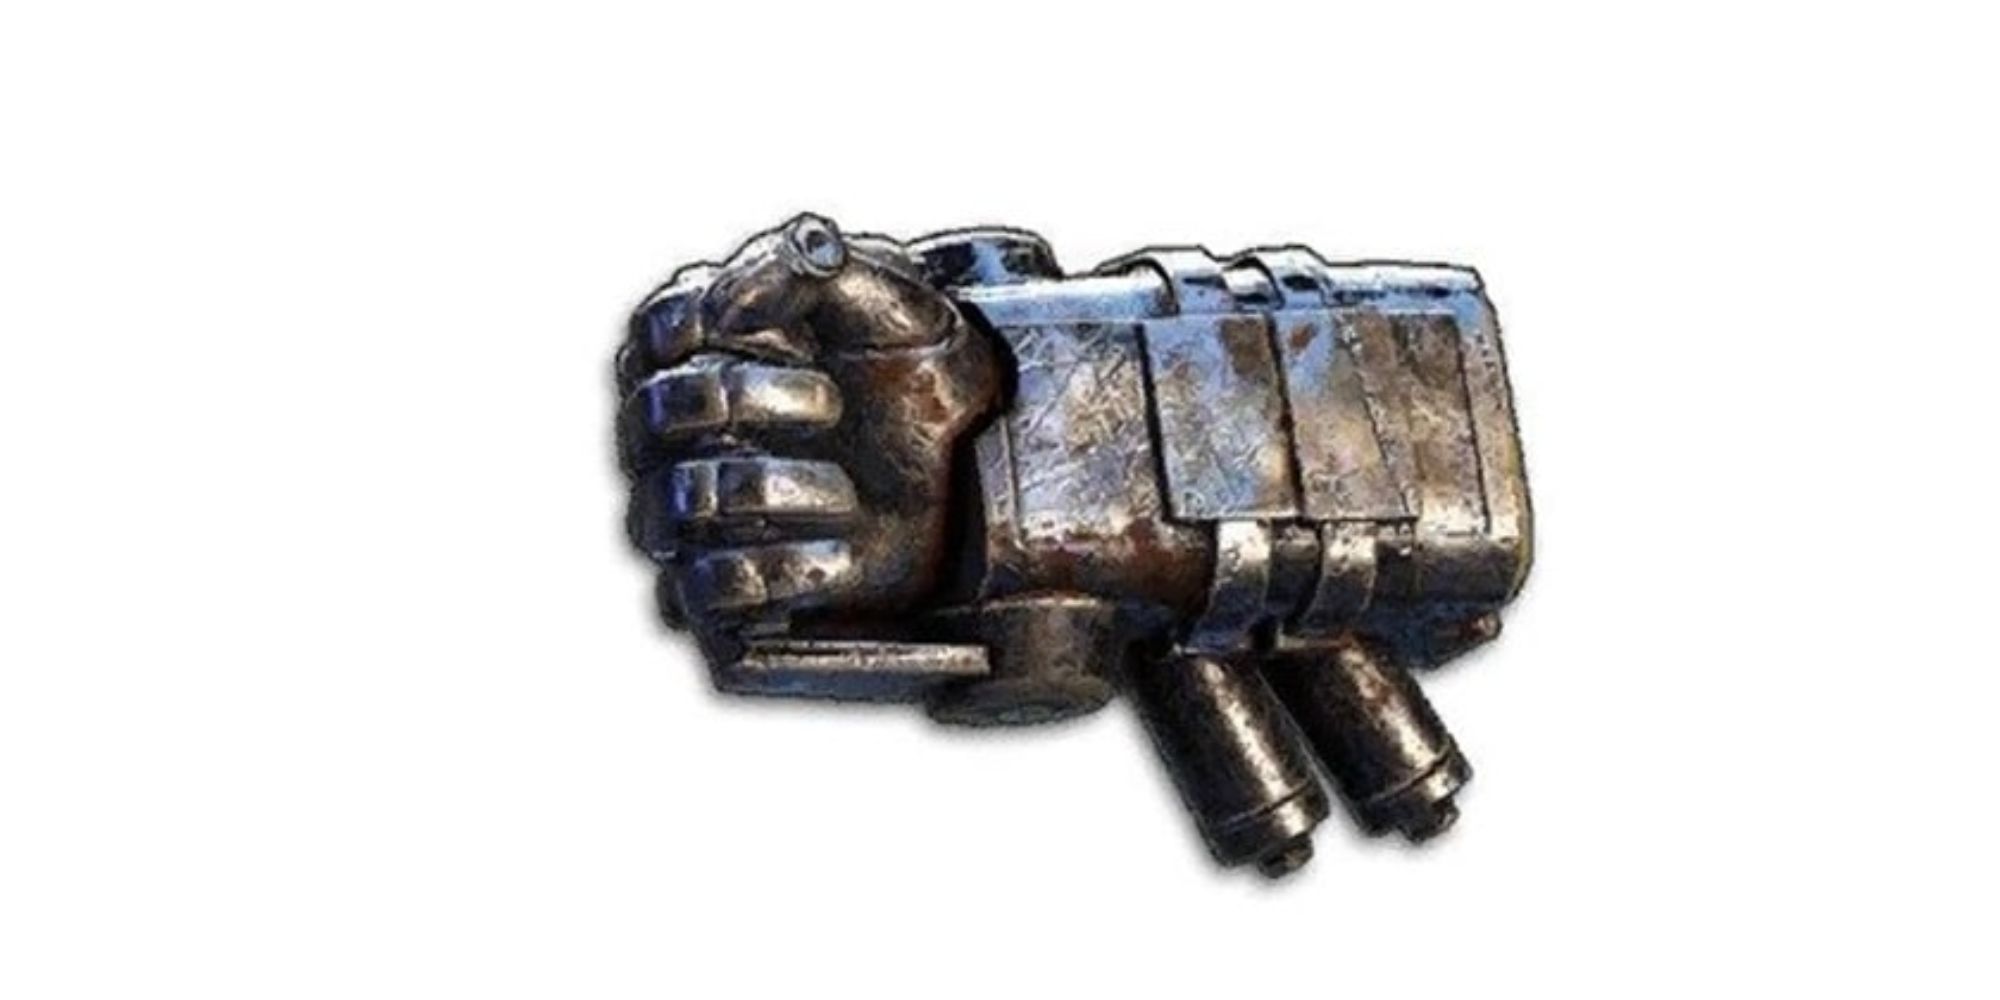 Close-up of Pneumatic Gauntlet weapon from Wasteland 3